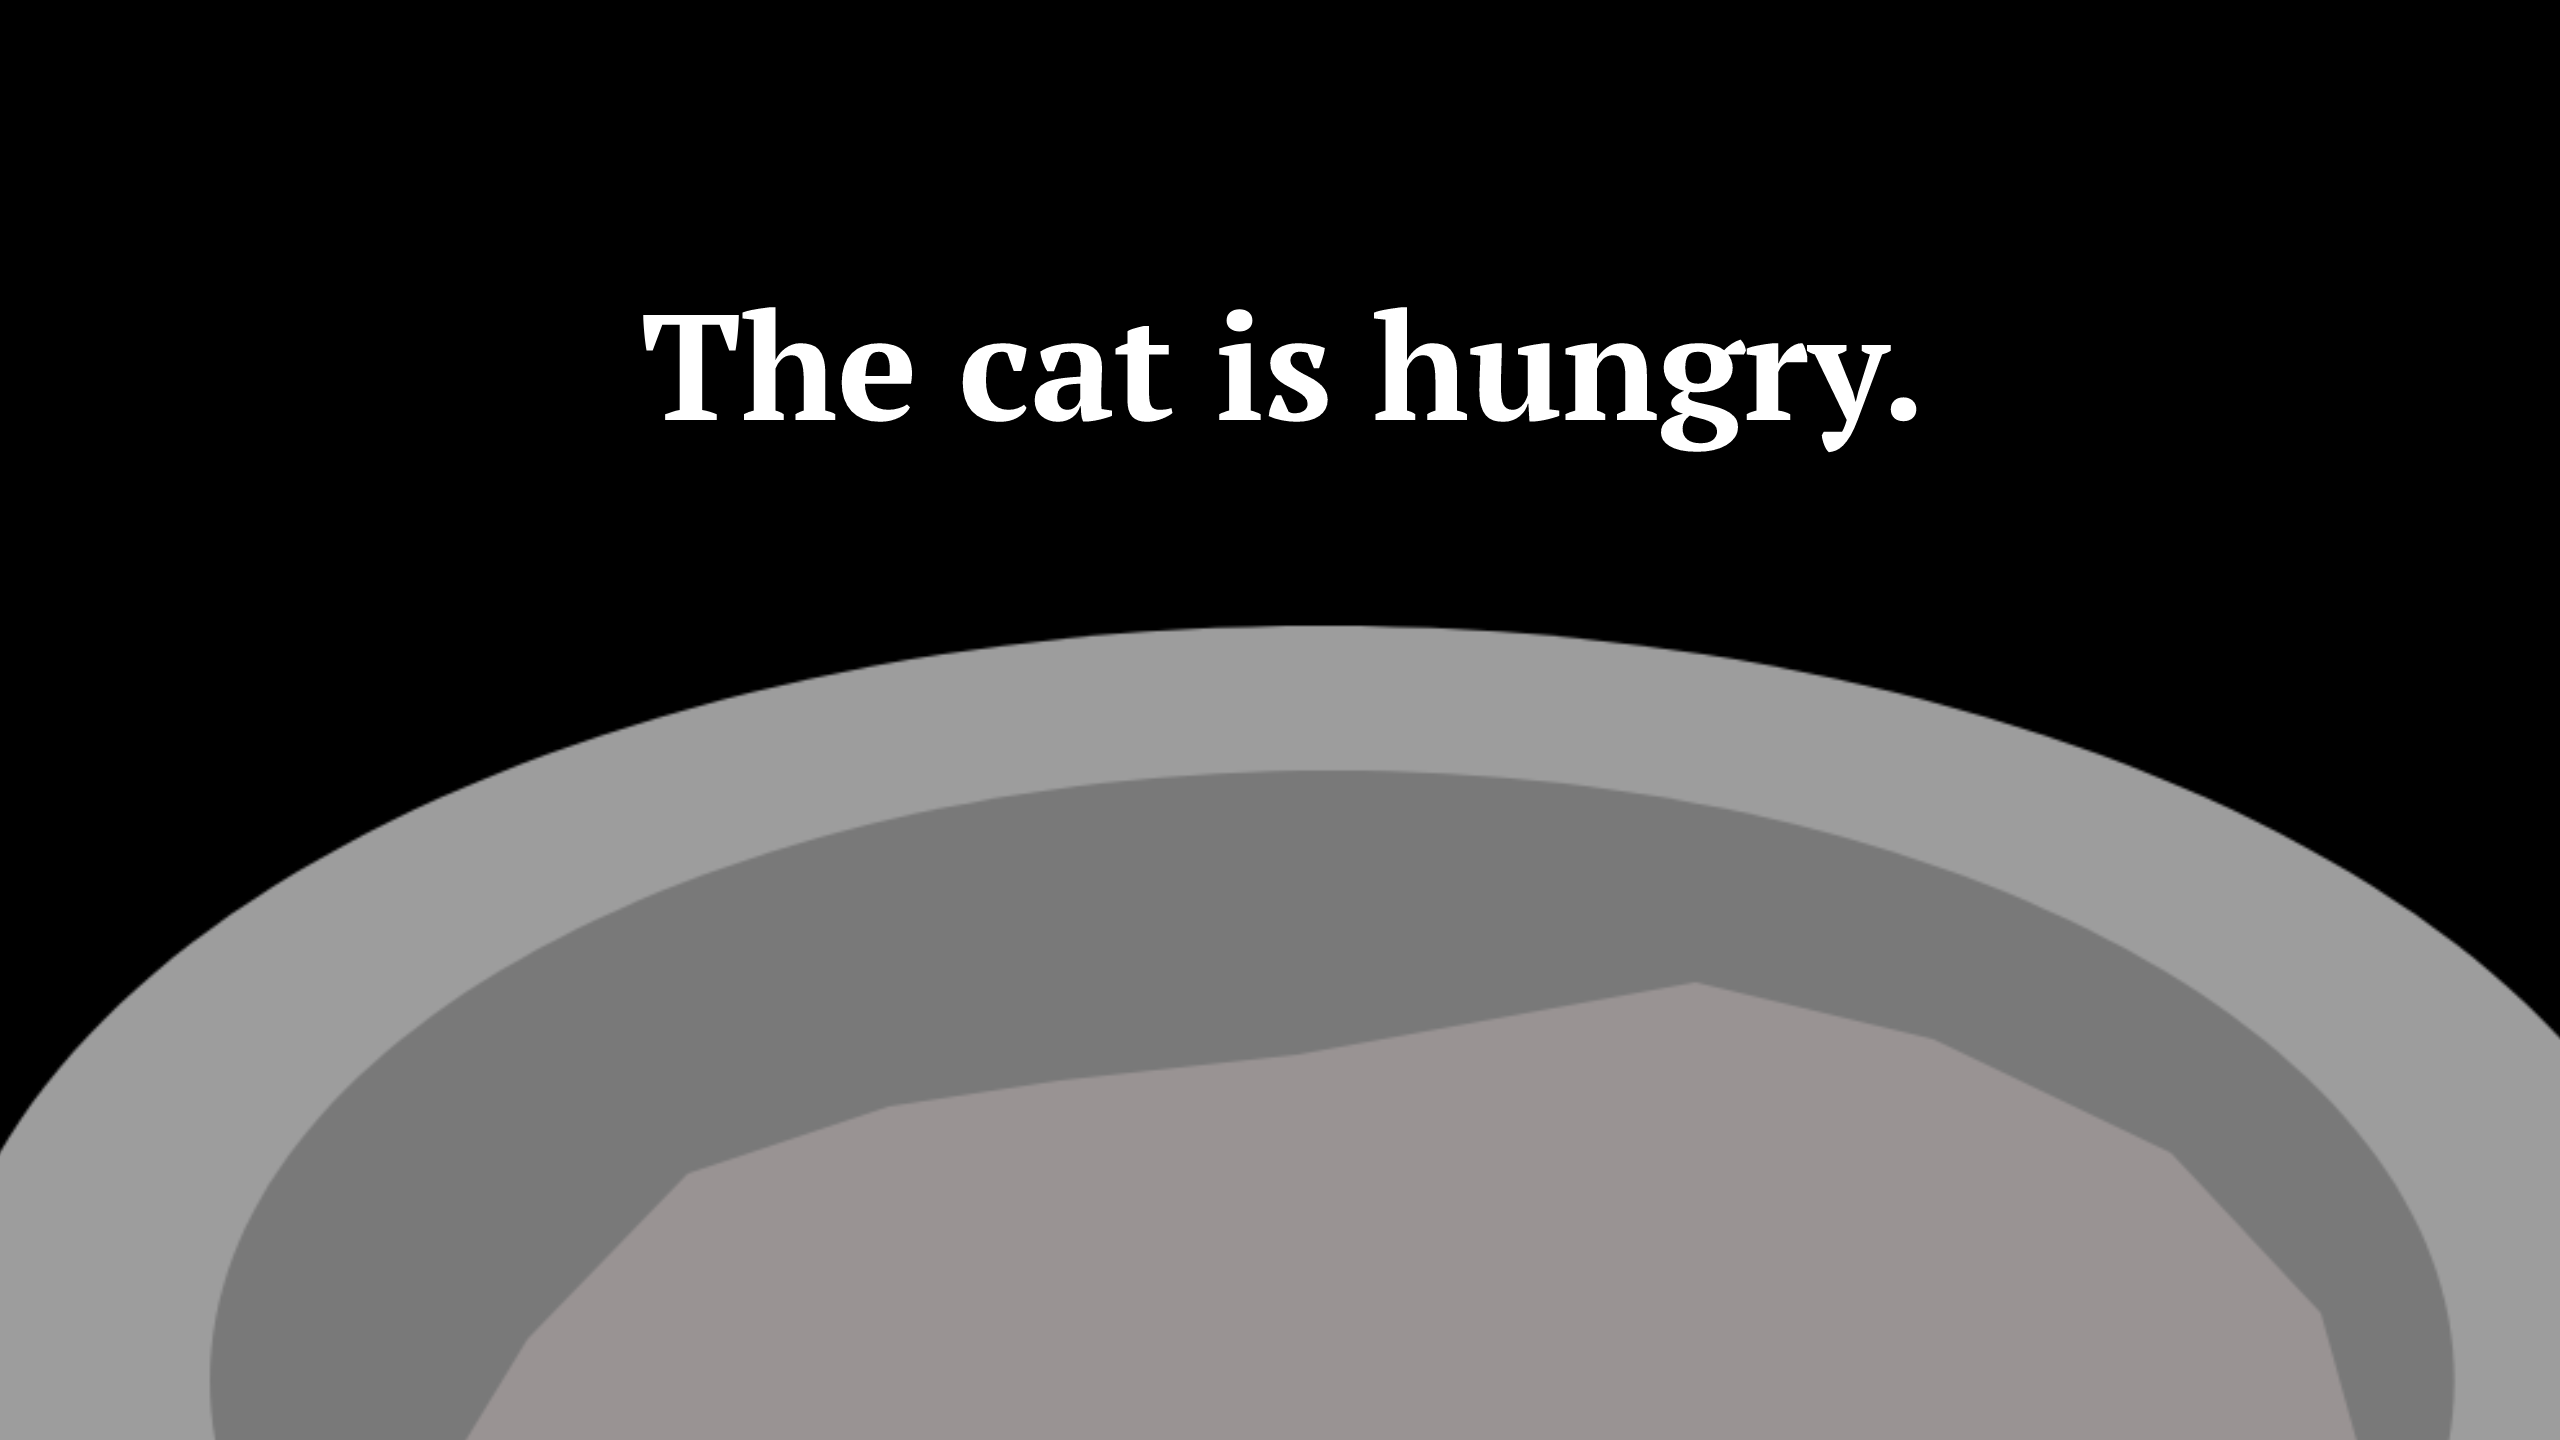 The cat is hungry.